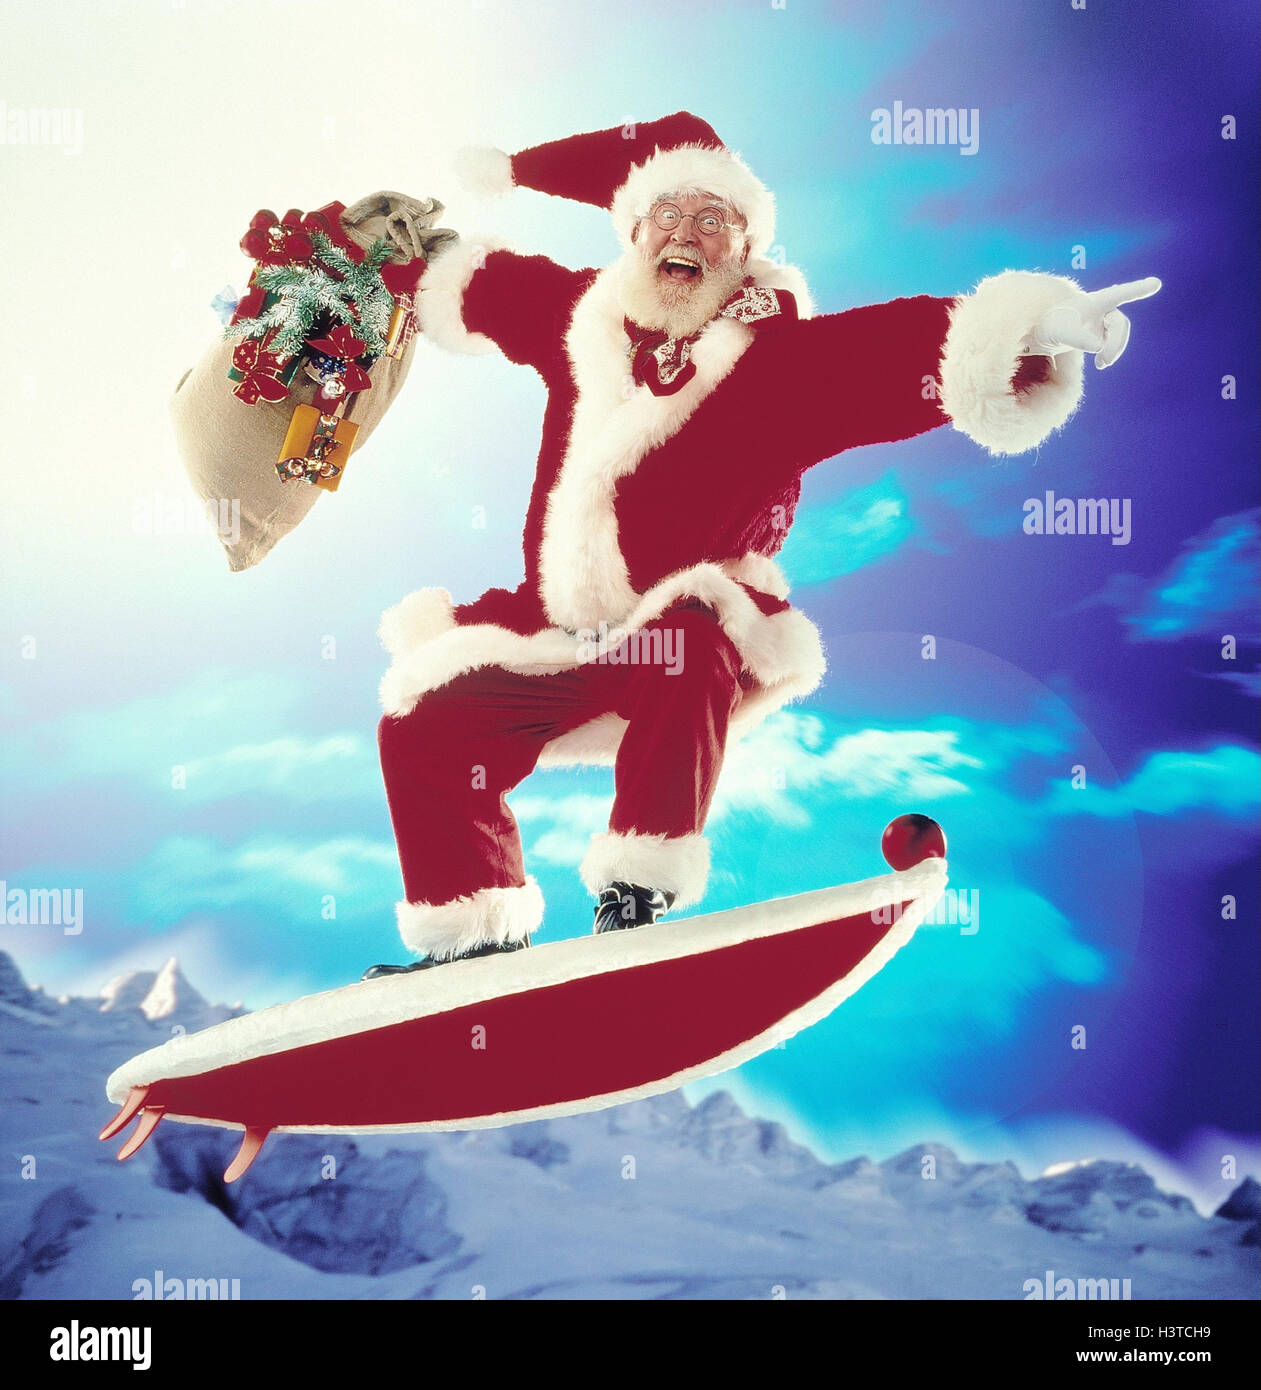 Santa Claus, surfboard, 'fly', pouch, presents yule tide, Christmas, Santa, Santa Claus, 'surf the internet', deliver Christmas presents, mountains, heavens, Composing, studio Stock Photo